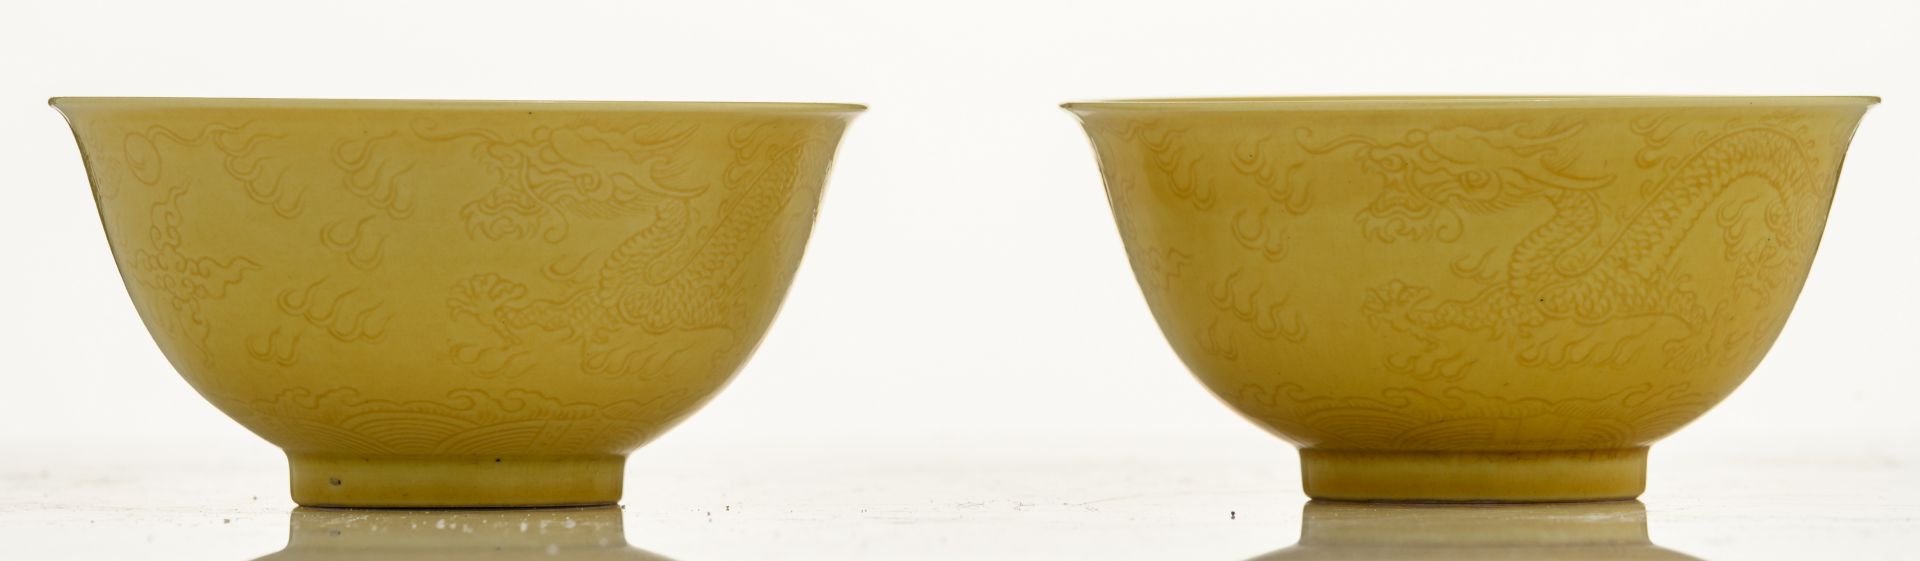 A pair of Chinese yellow glazed imperial bowls, with incised dragons on the outside, marked - Image 2 of 8